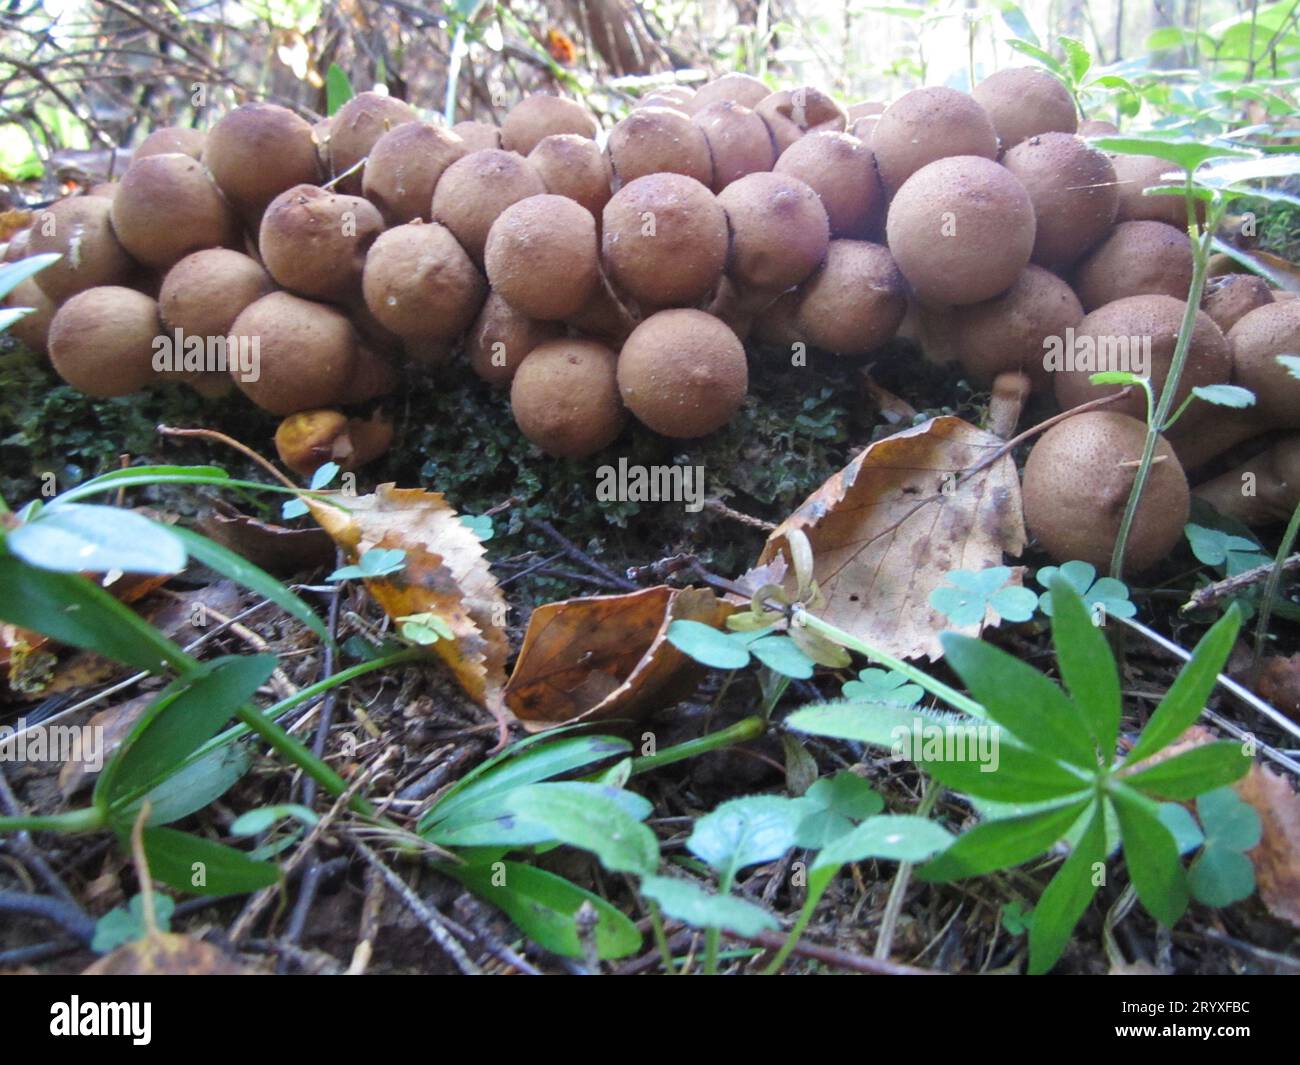 Mushroom Puffball pear-shaped or Lycoperdon pyriforme is a species of basidiomycete mushroom, part of the genus Puffball of the Champignon family - Ag Stock Photo